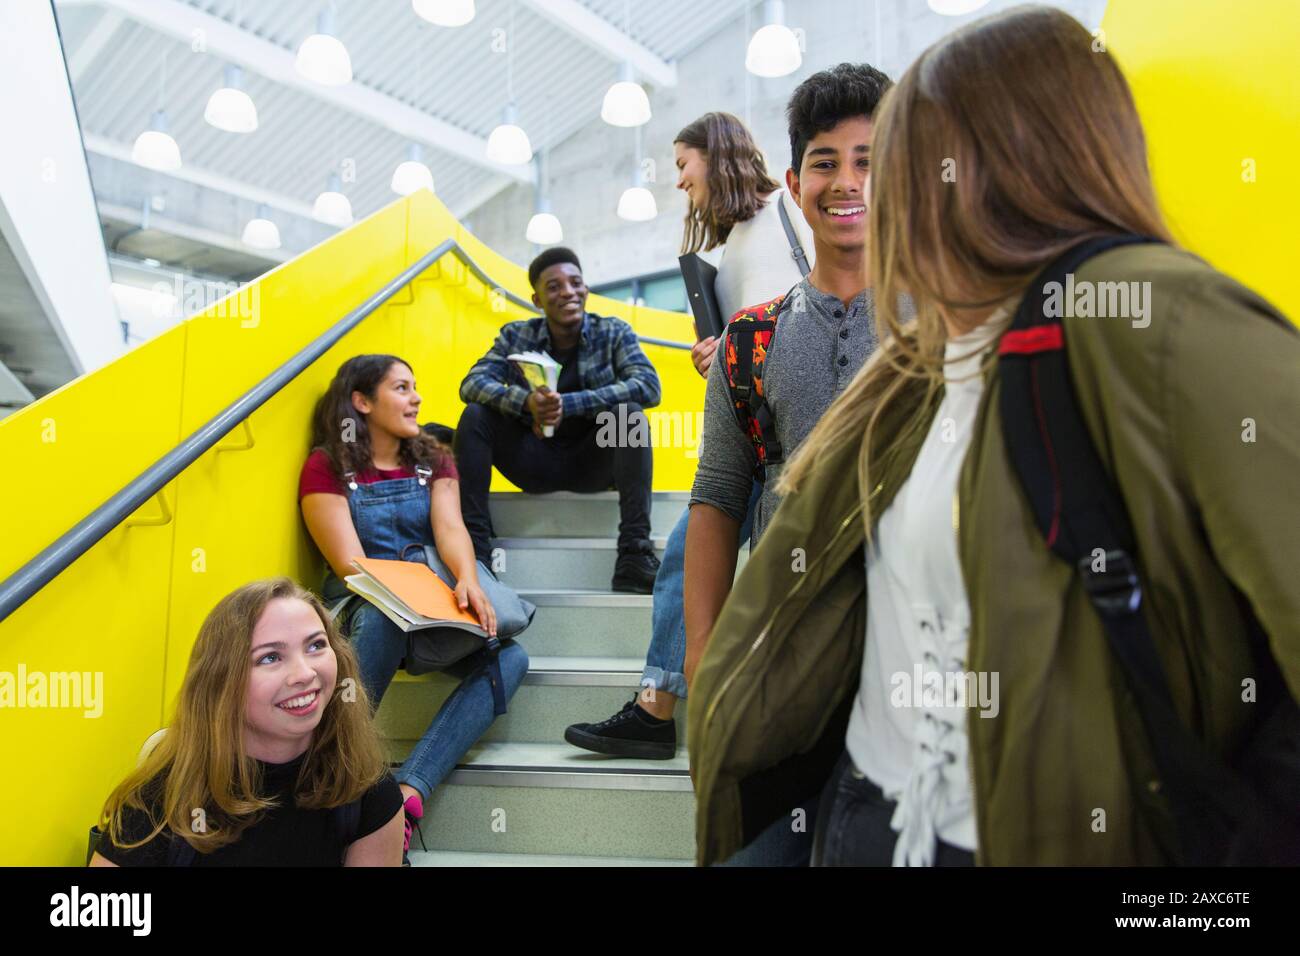 Junior high students hanging out, talking on stairs Stock Photo